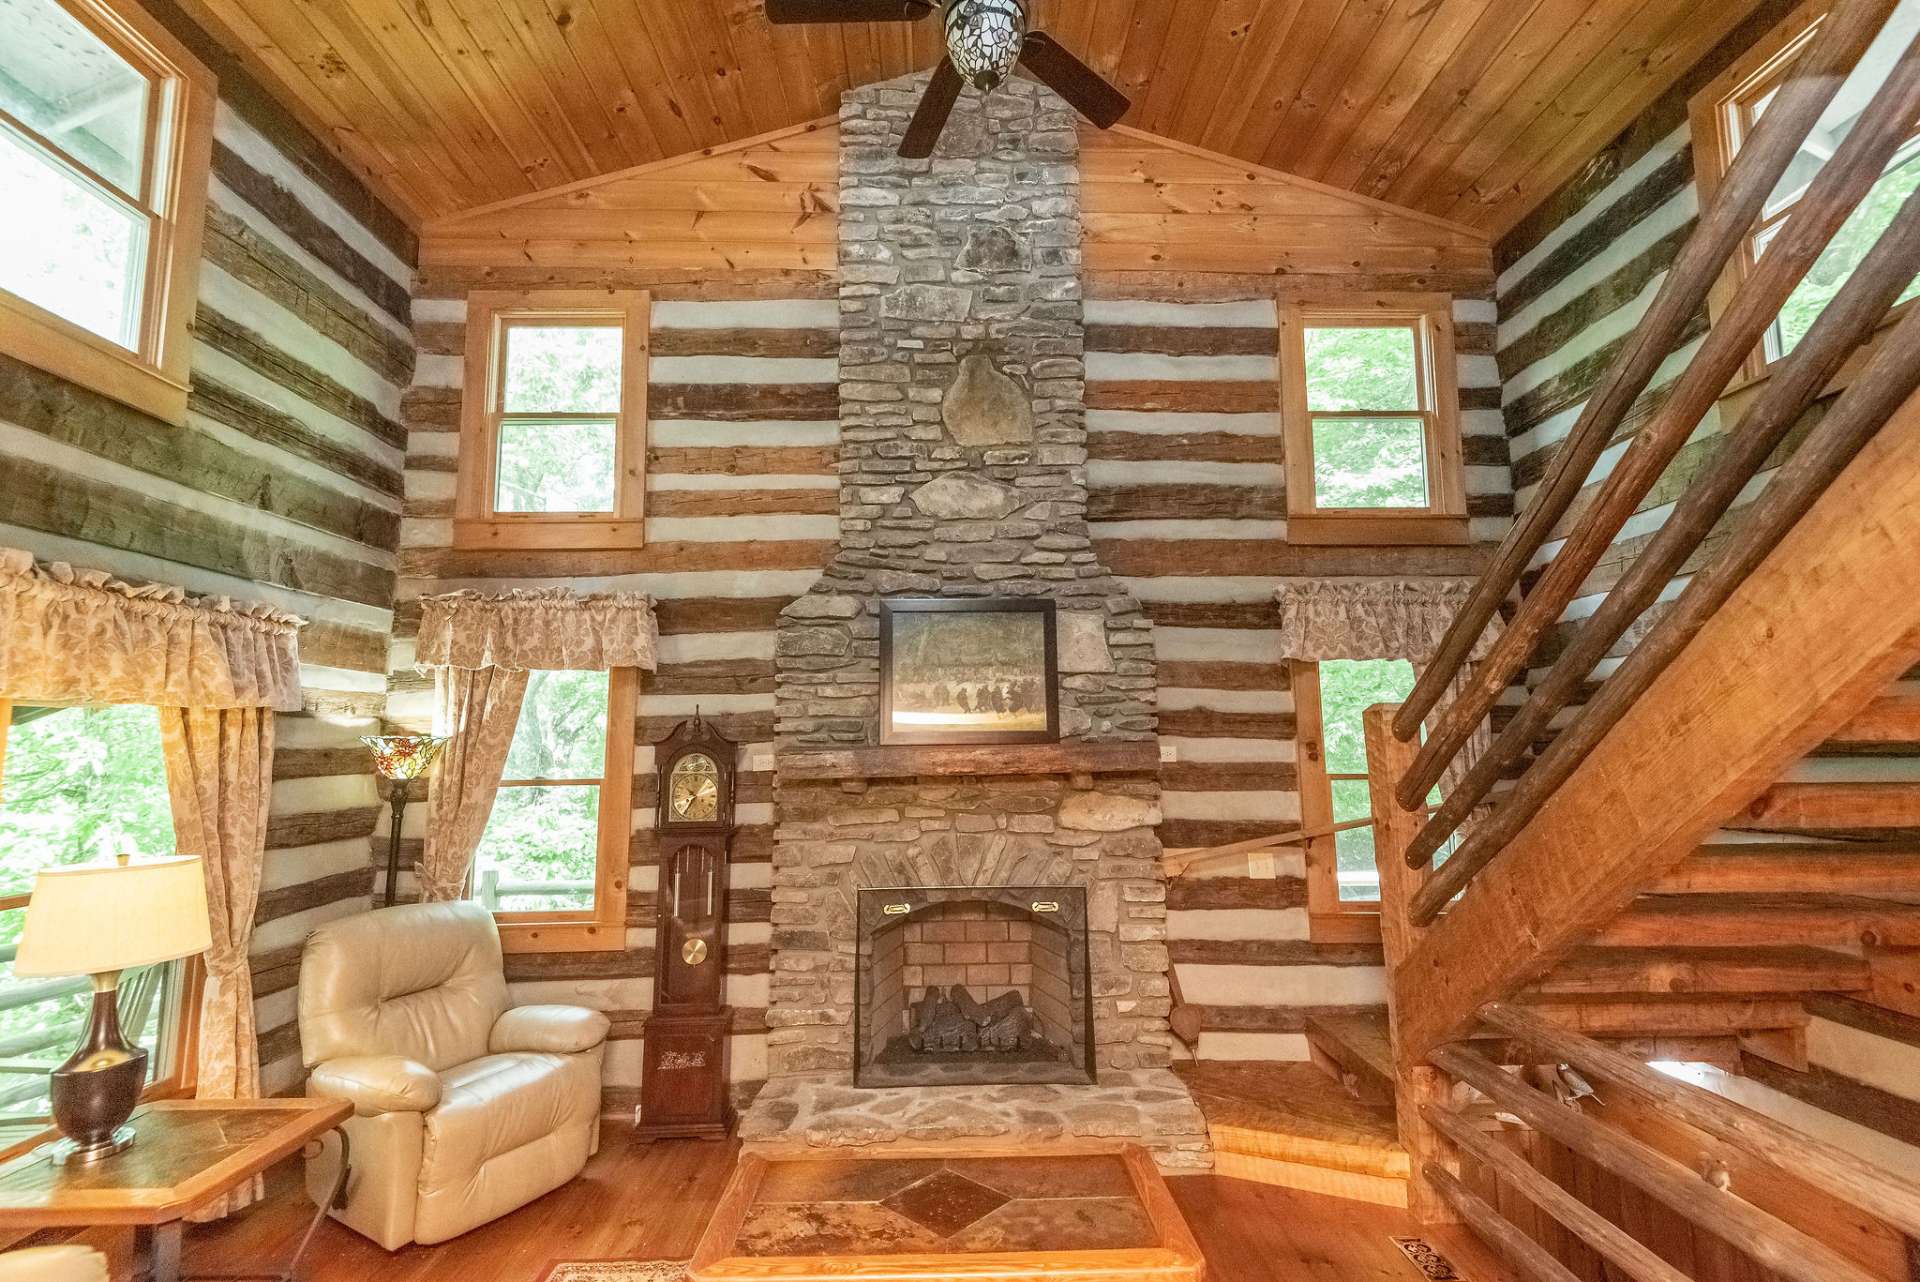 Two story stone fireplace with gas logs soars to the vaulted ceiling.